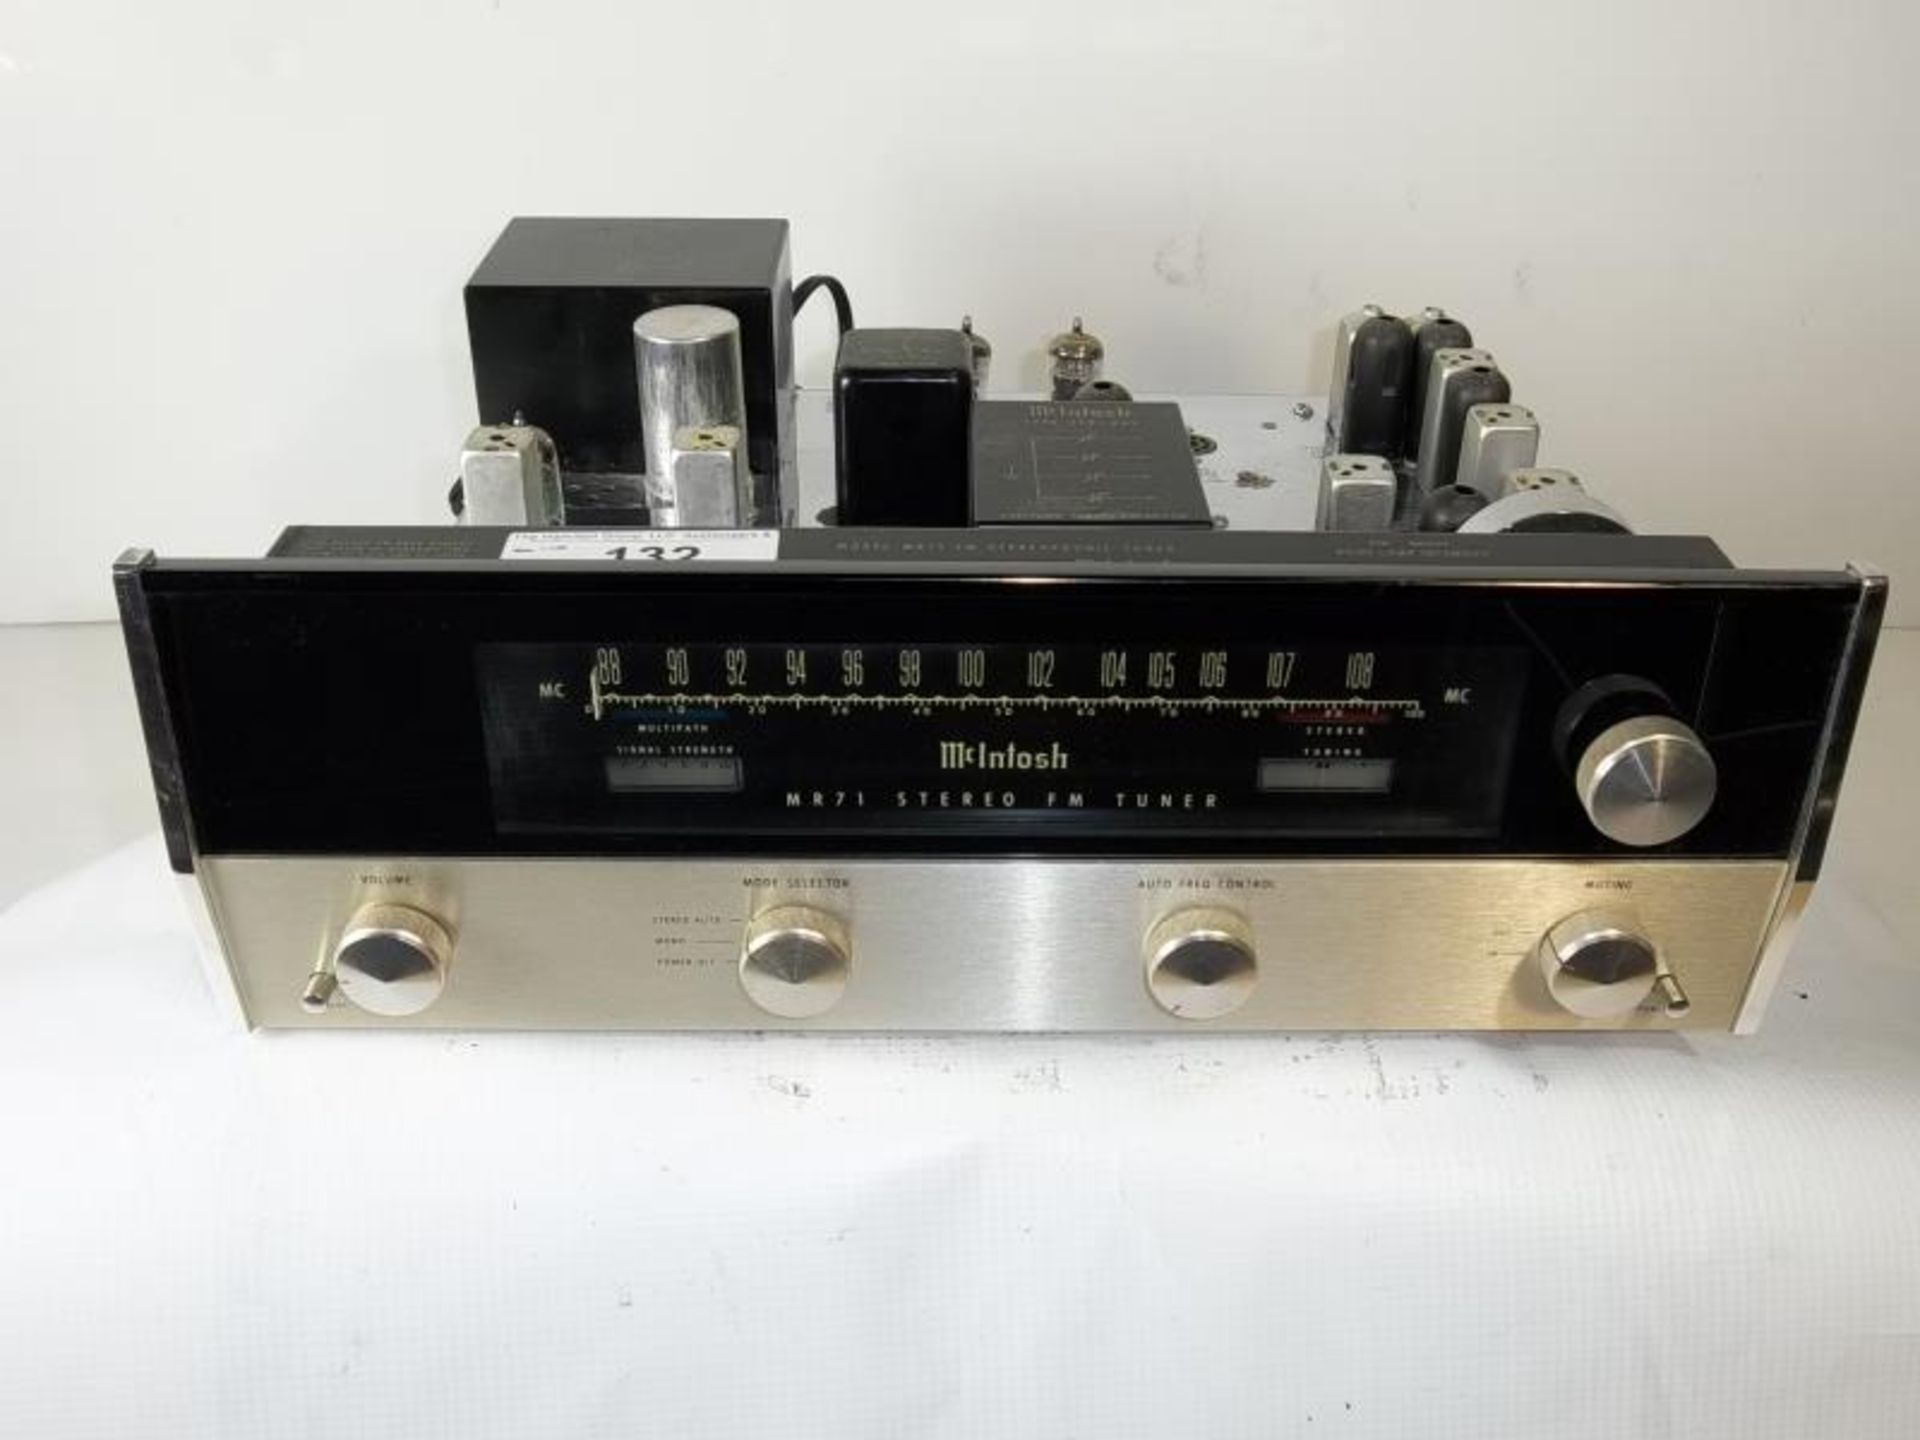 McIntosh MR-71 Stereo FM Tuner, parts only, missing tubes, no case, s # 66B29 - did not test